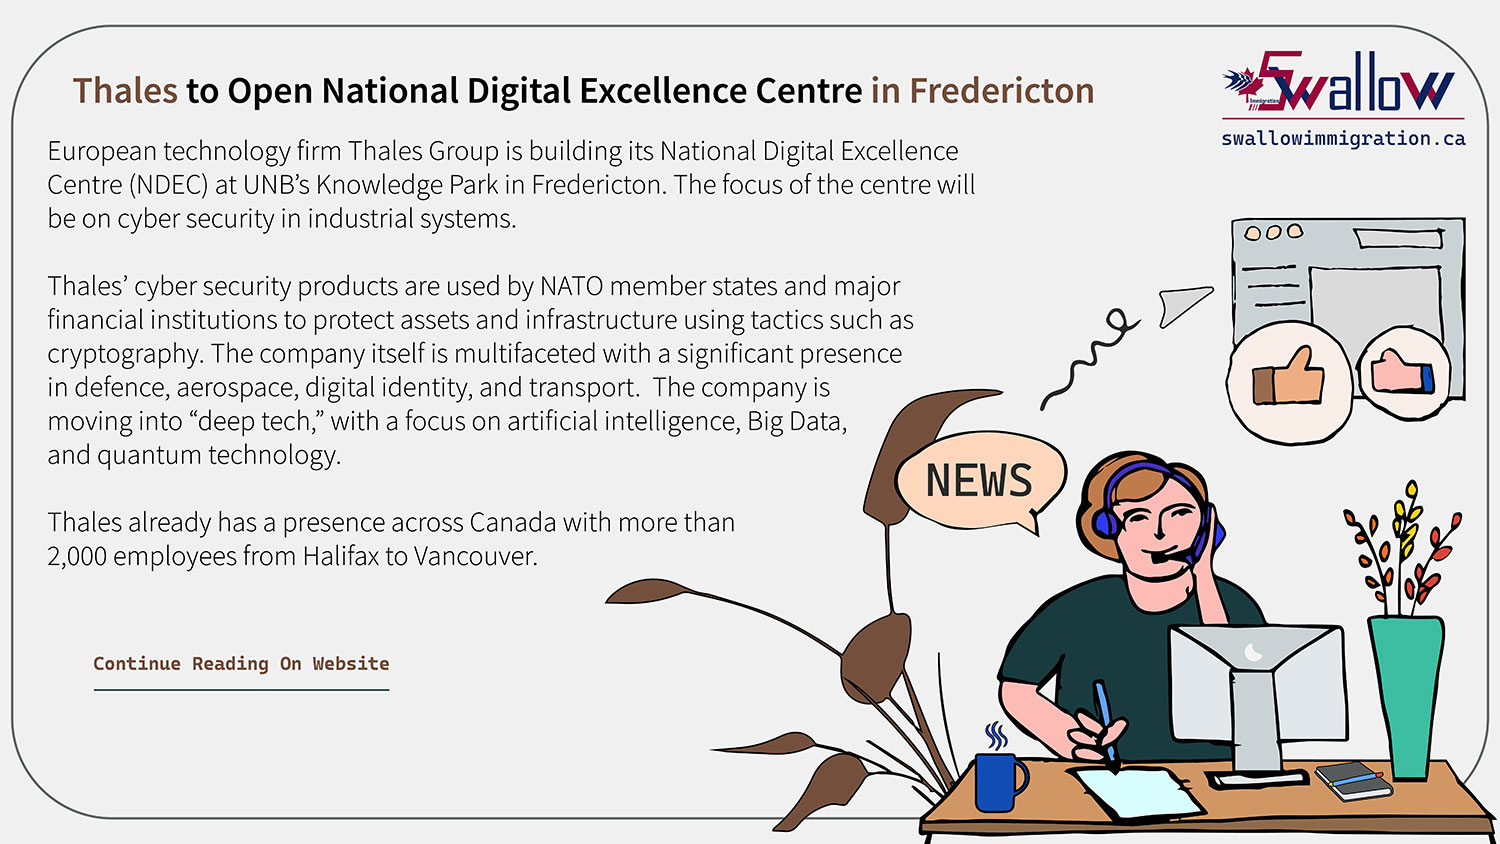 Thales to Open National Digital Excellence Centre in Fredericton